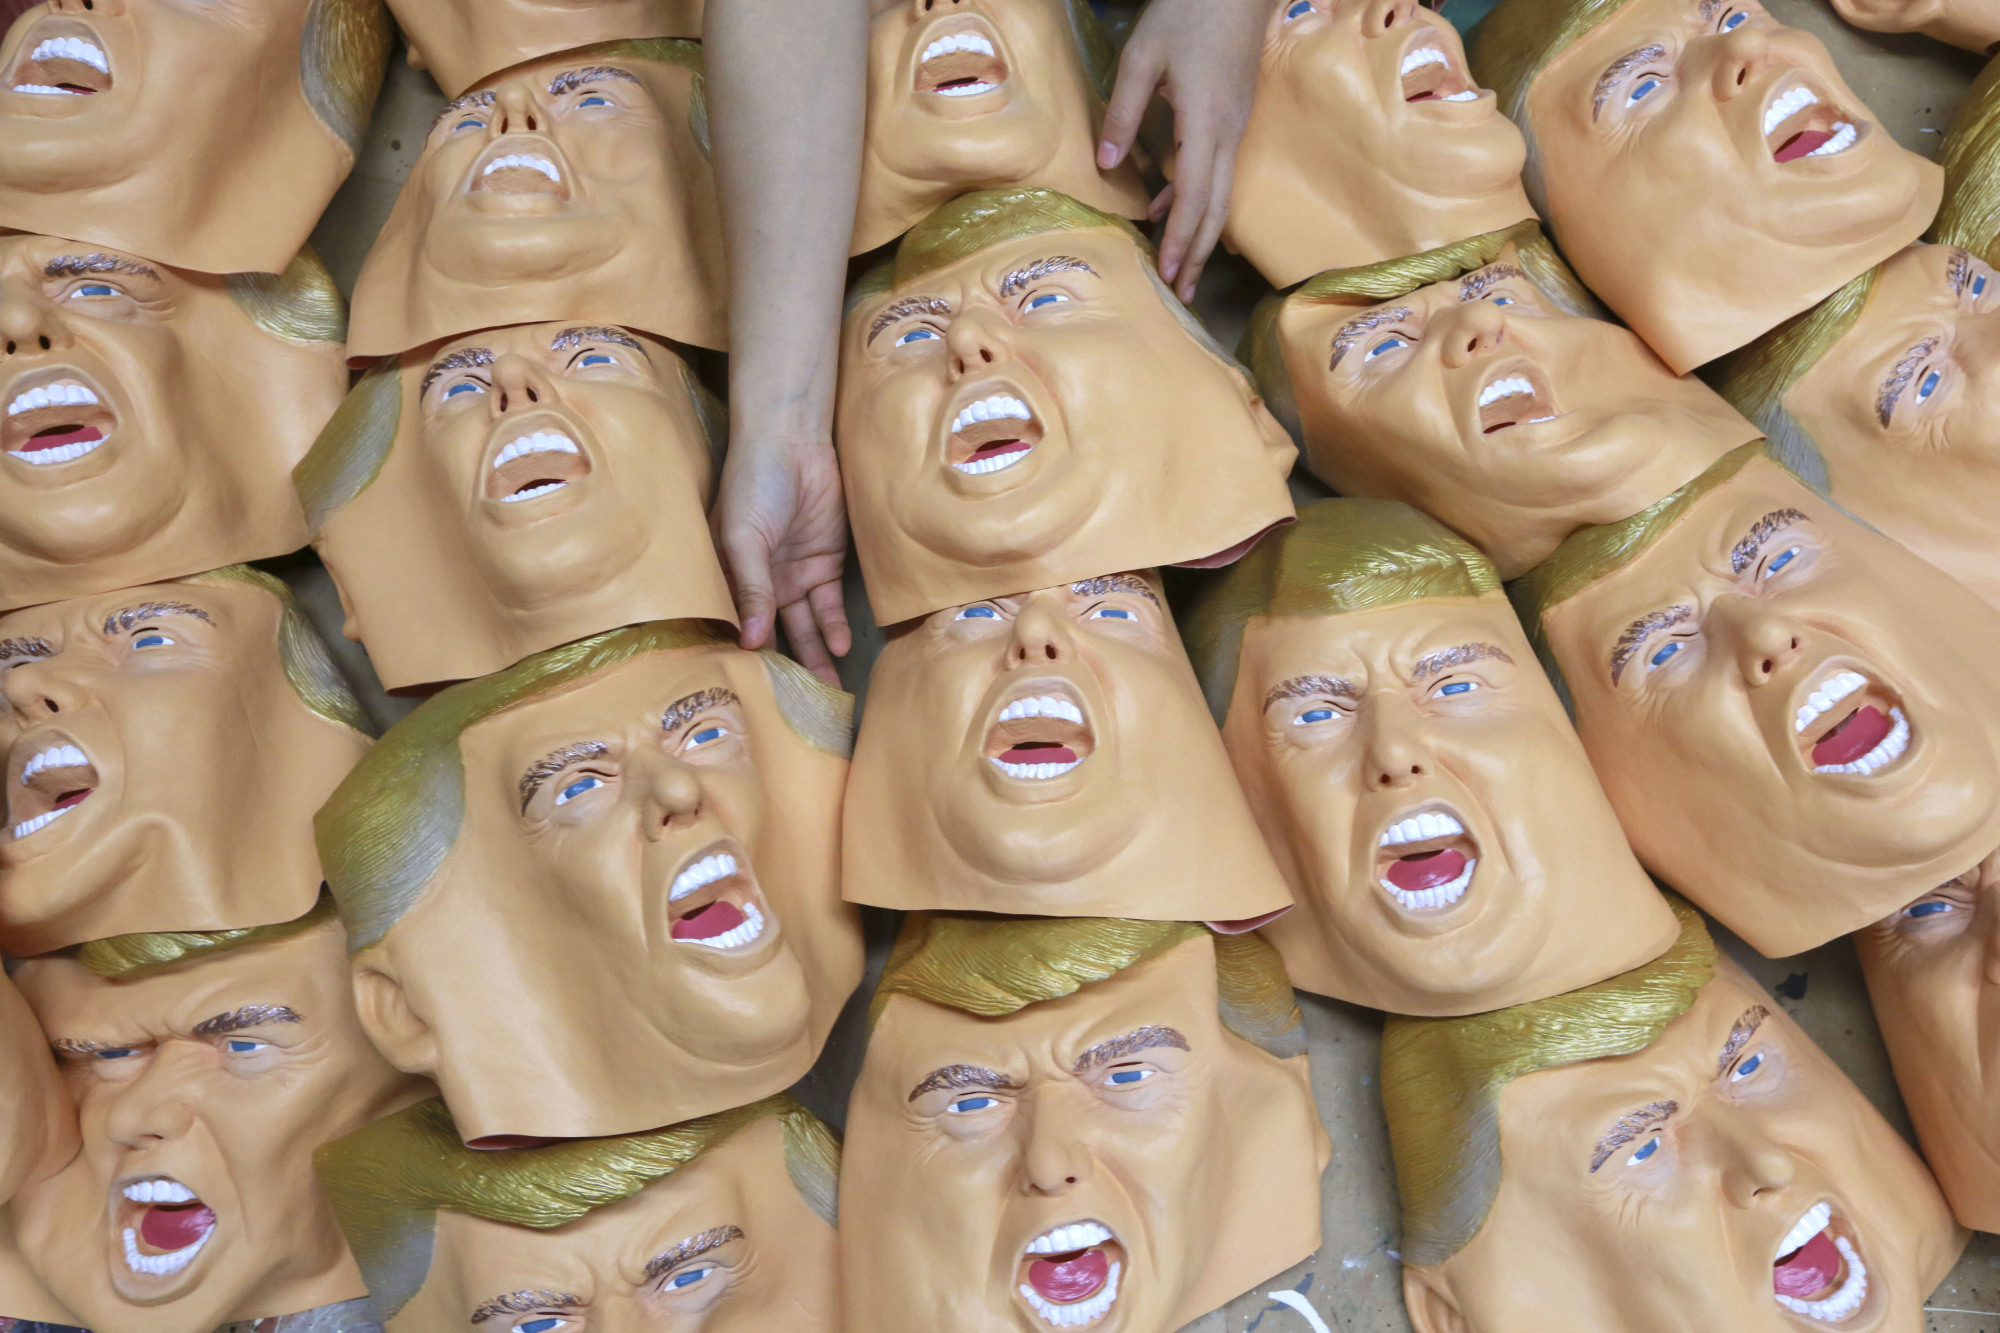 Mug shot: Rubber masks depicting U.S. President-elect Donald Trump await finishing touches at the Ogawa Studio in Saitama on Tuesday. Ogawa Studio is working nonstop to catch up with a flood of orders for Trump masks since his election victory. | AP